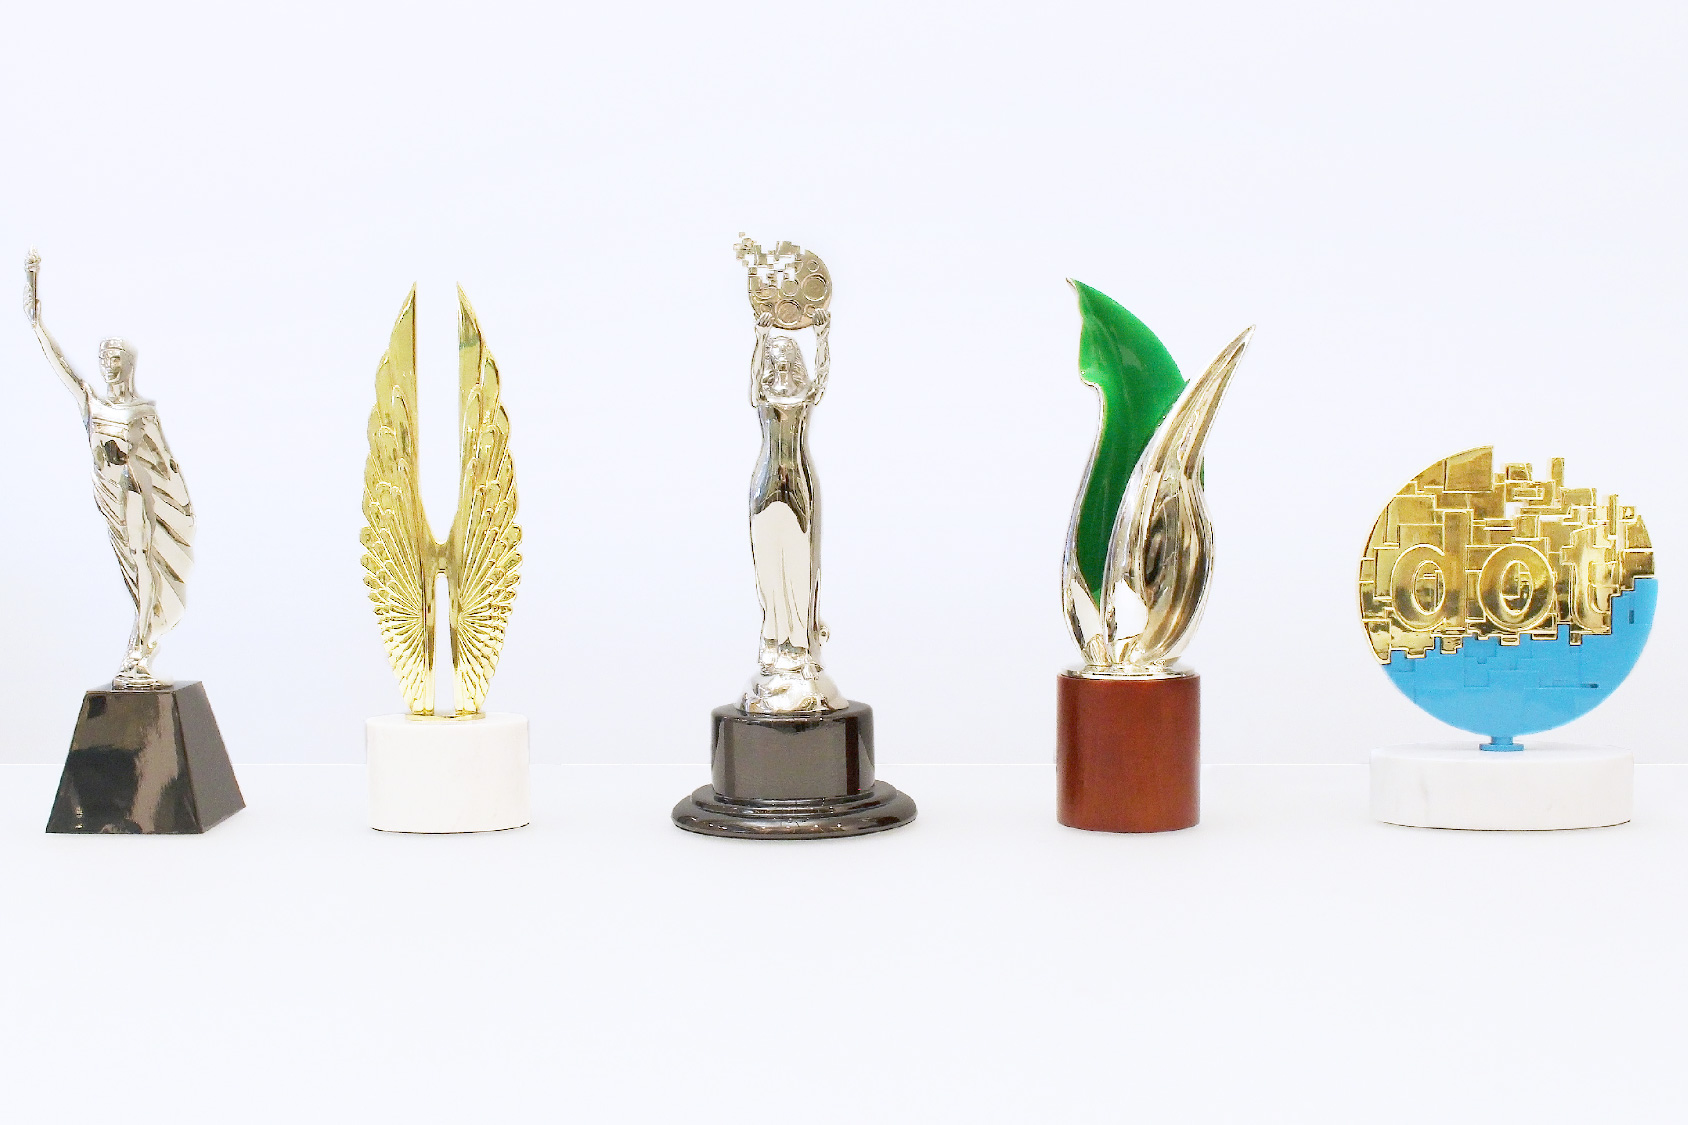 Five Custom Metal Trophies created by Society Awards for AMCP